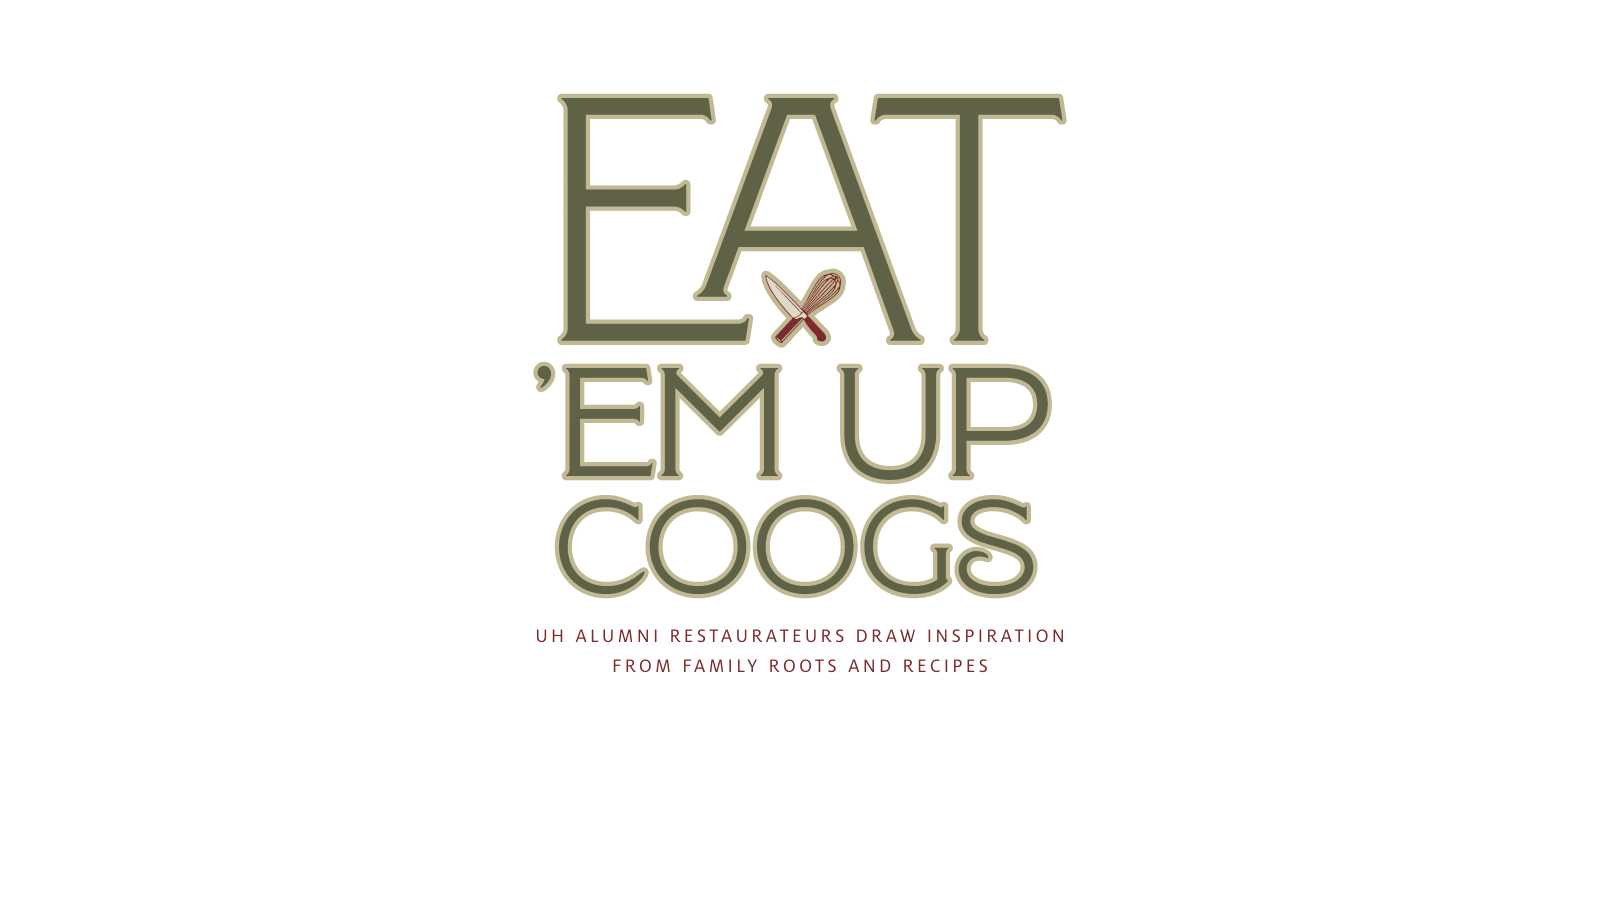 Eat'em Up Coogs - UH Alumni Restauranteurs Draw Inspiration From Family Roots and Recipes